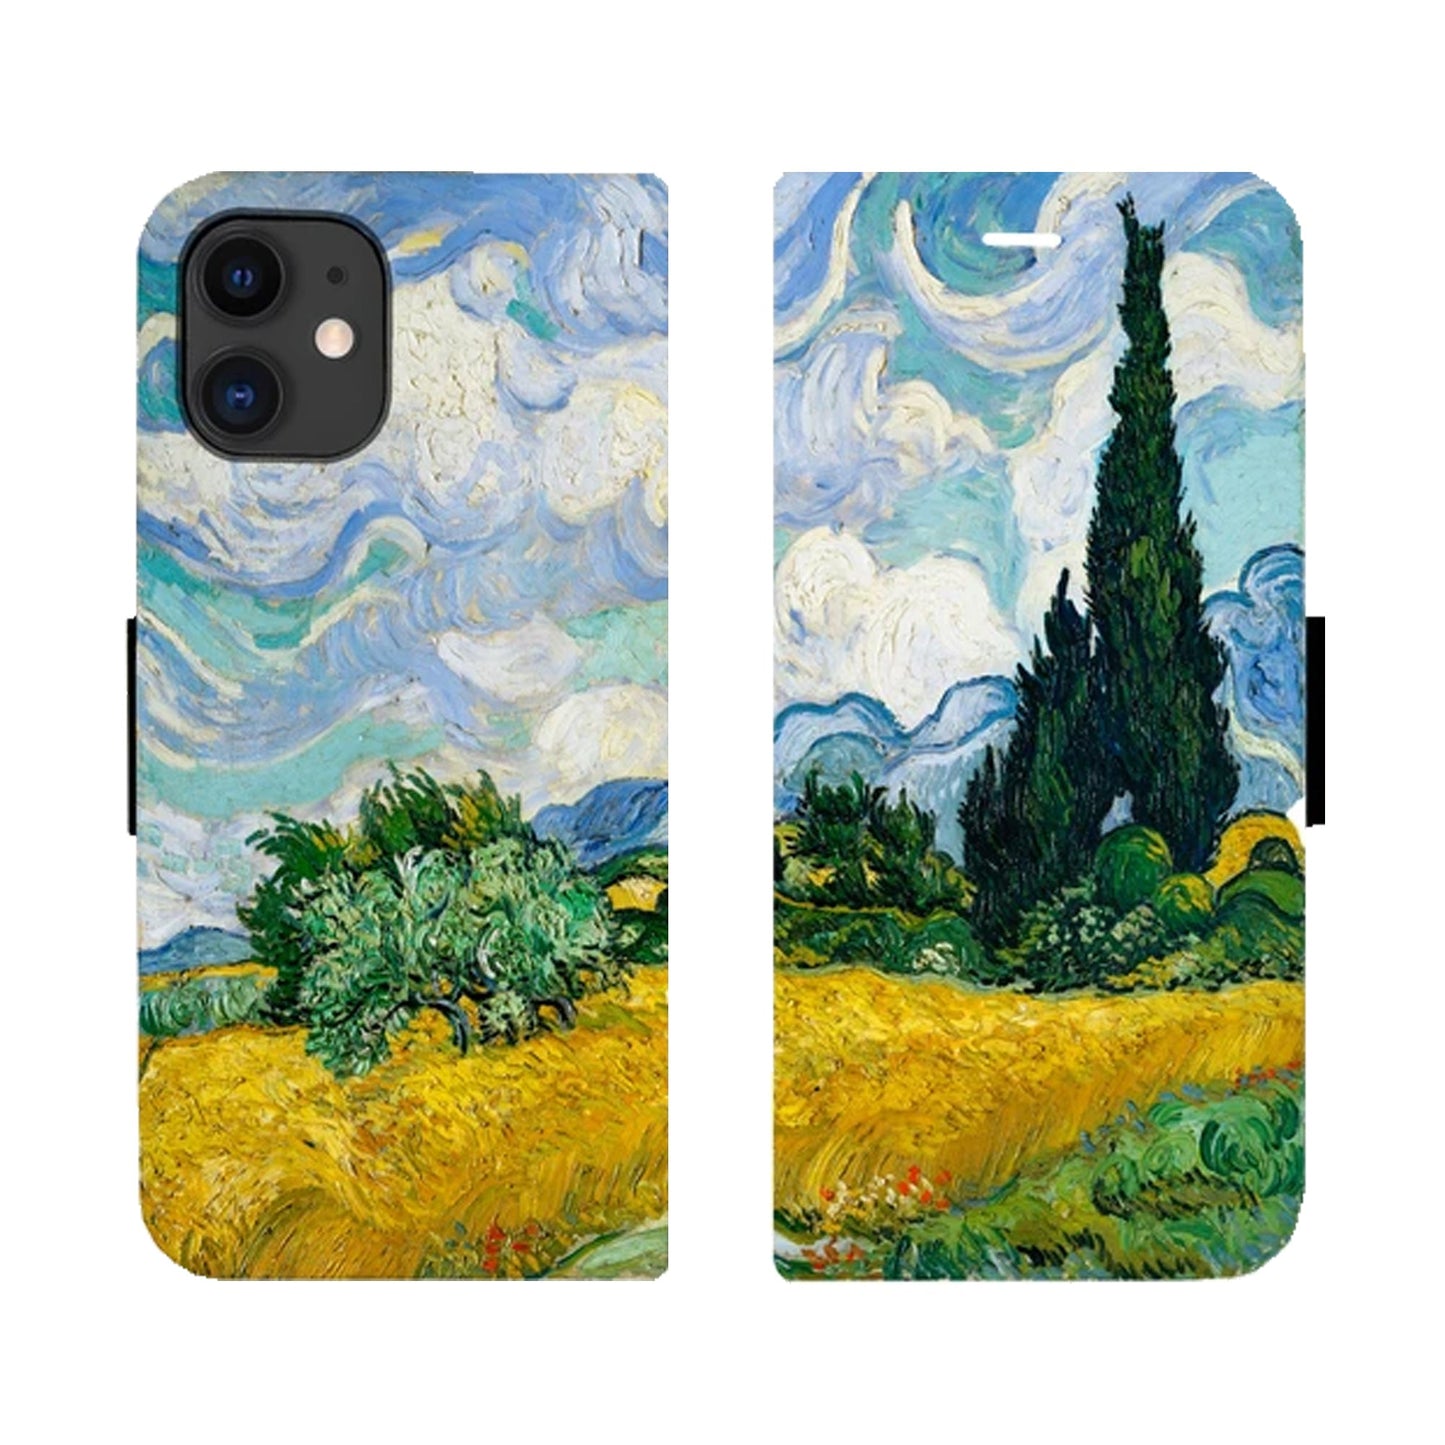 Van Gogh - Wheat Field Victor Case for iPhone 11